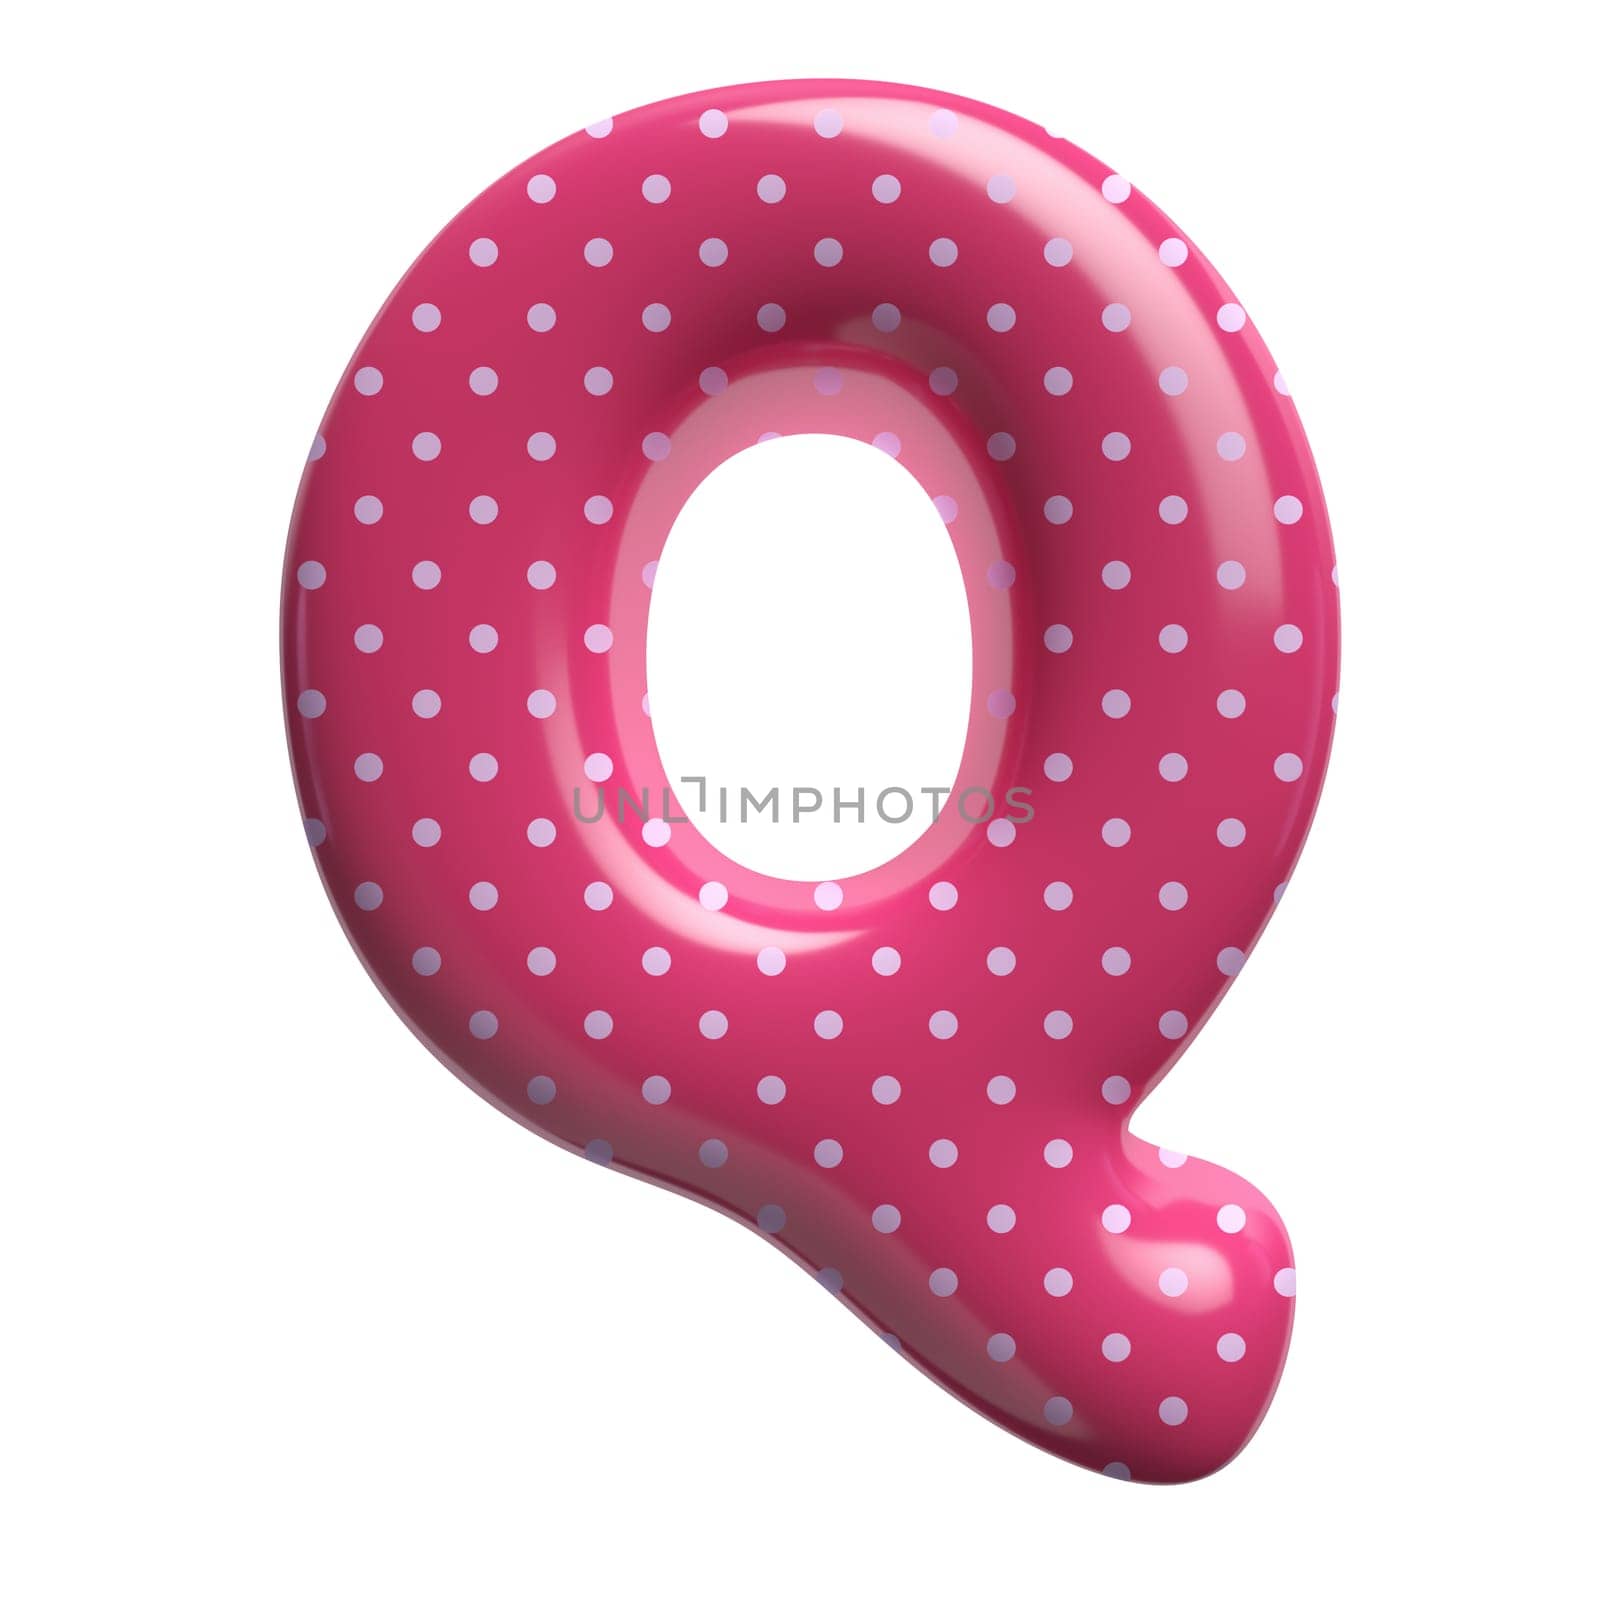 Polka dot letter Q - Upper-case 3d pink retro font - suitable for Fashion, retro design or decoration related subjects by chrisroll